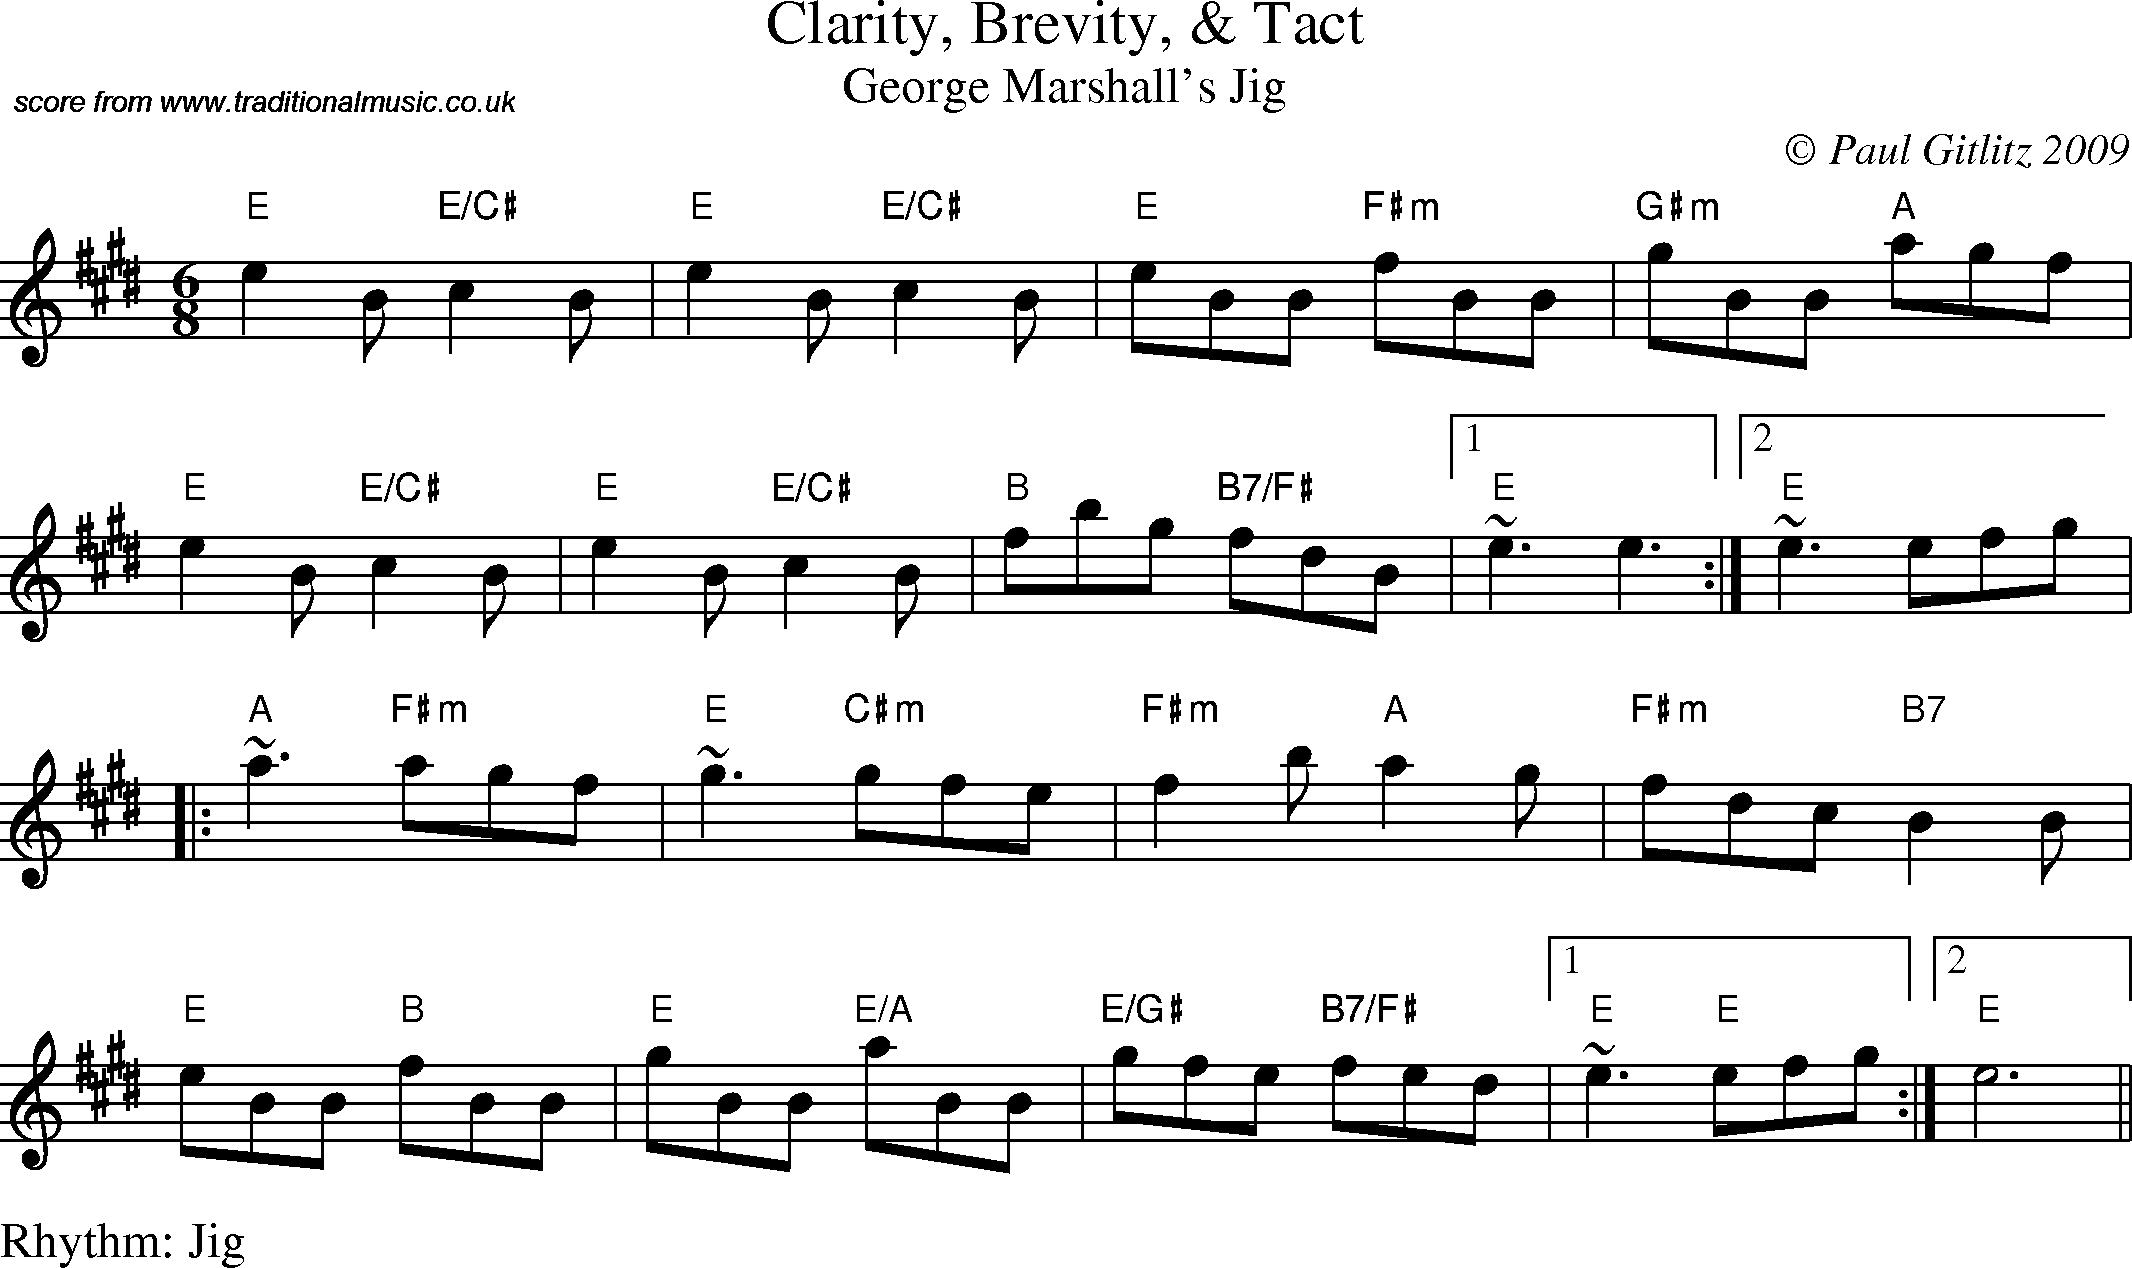 Sheet Music Score for Jig - Clarity, Brevity, & Tact